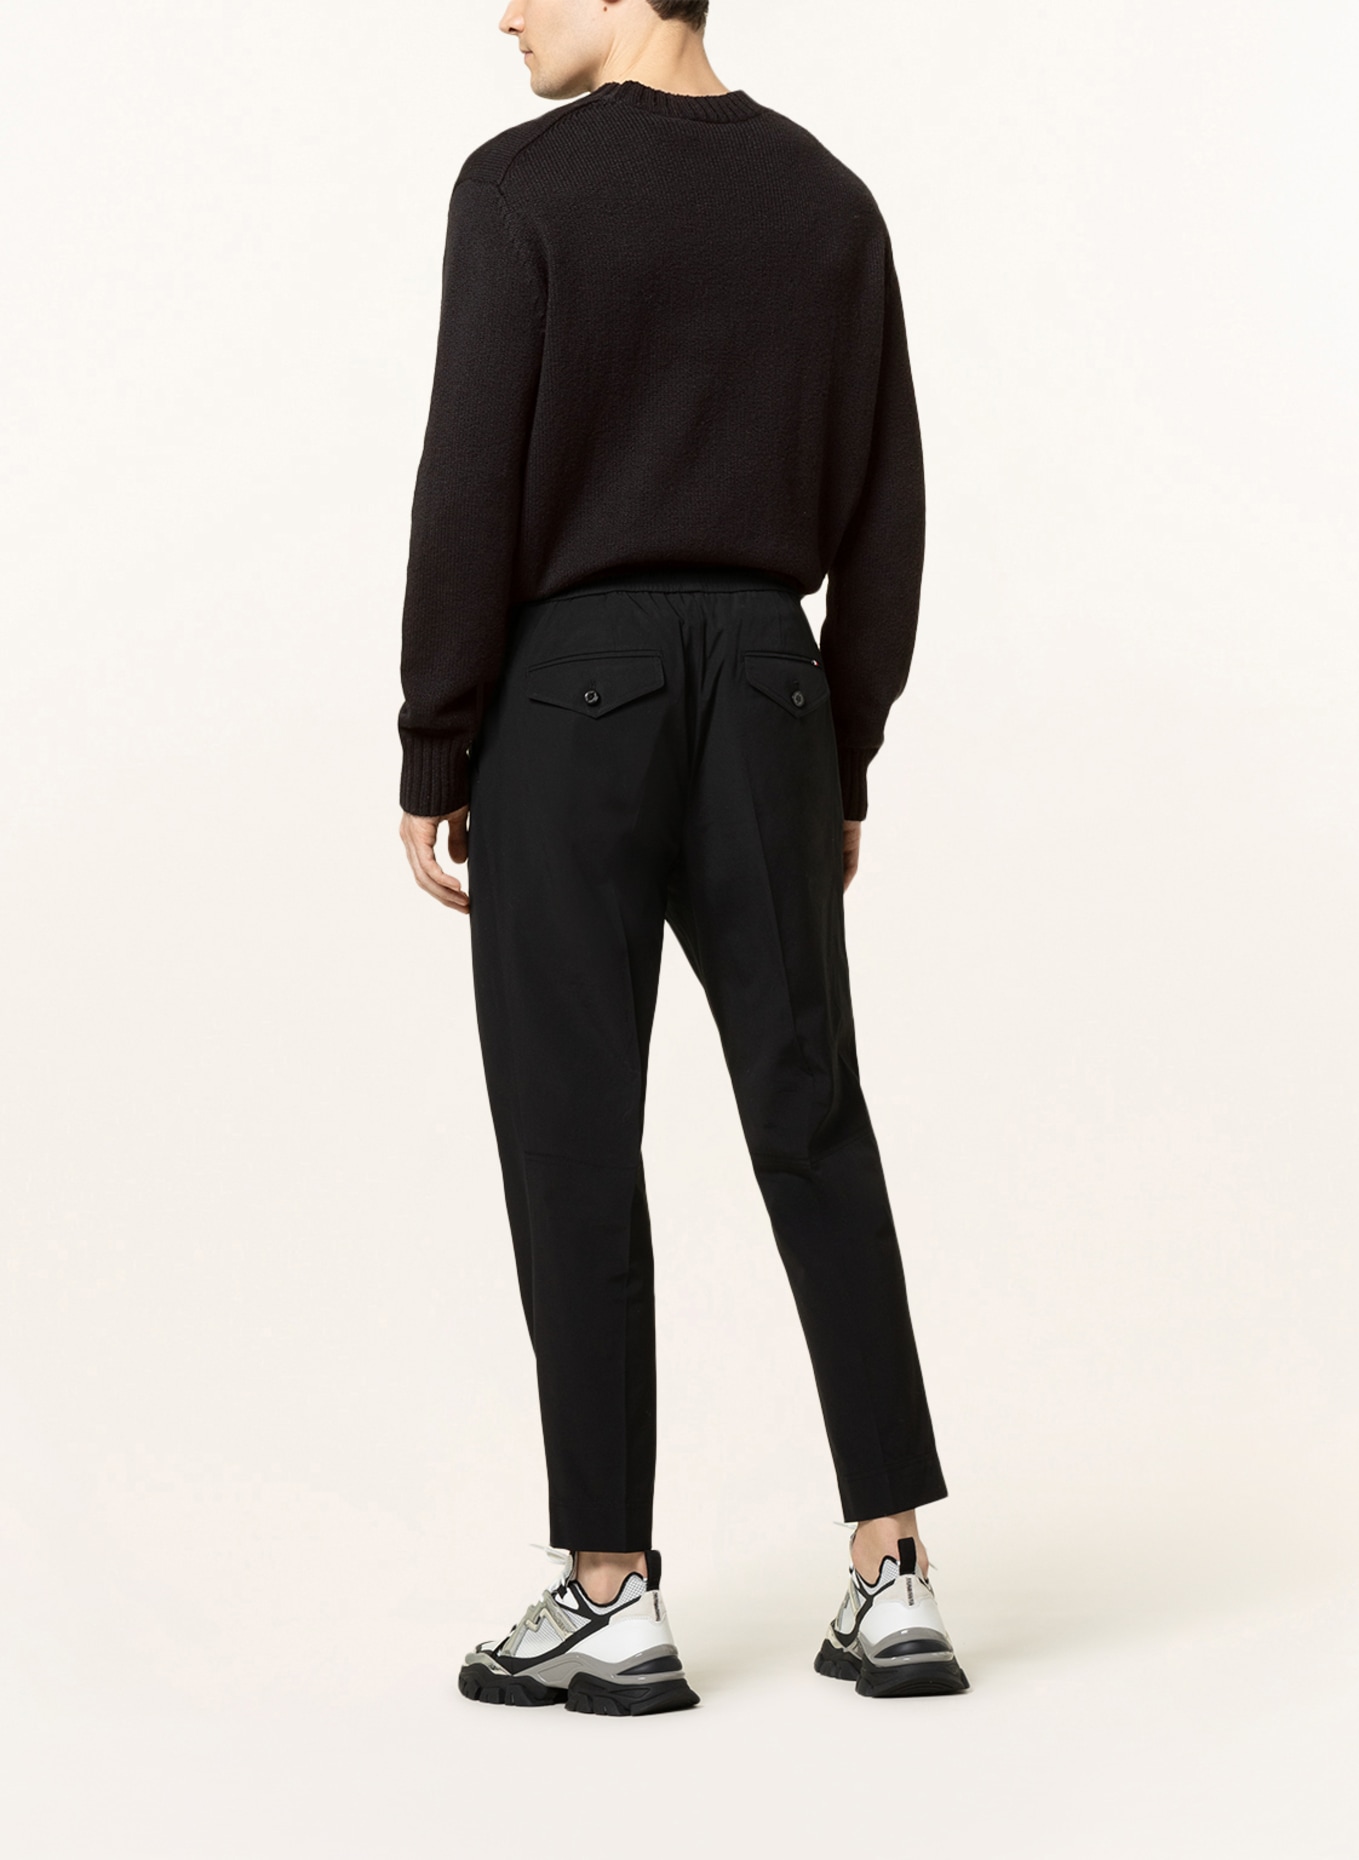 MONCLER Trousers in jogger style with cropped leg length, Color: BLACK (Image 3)